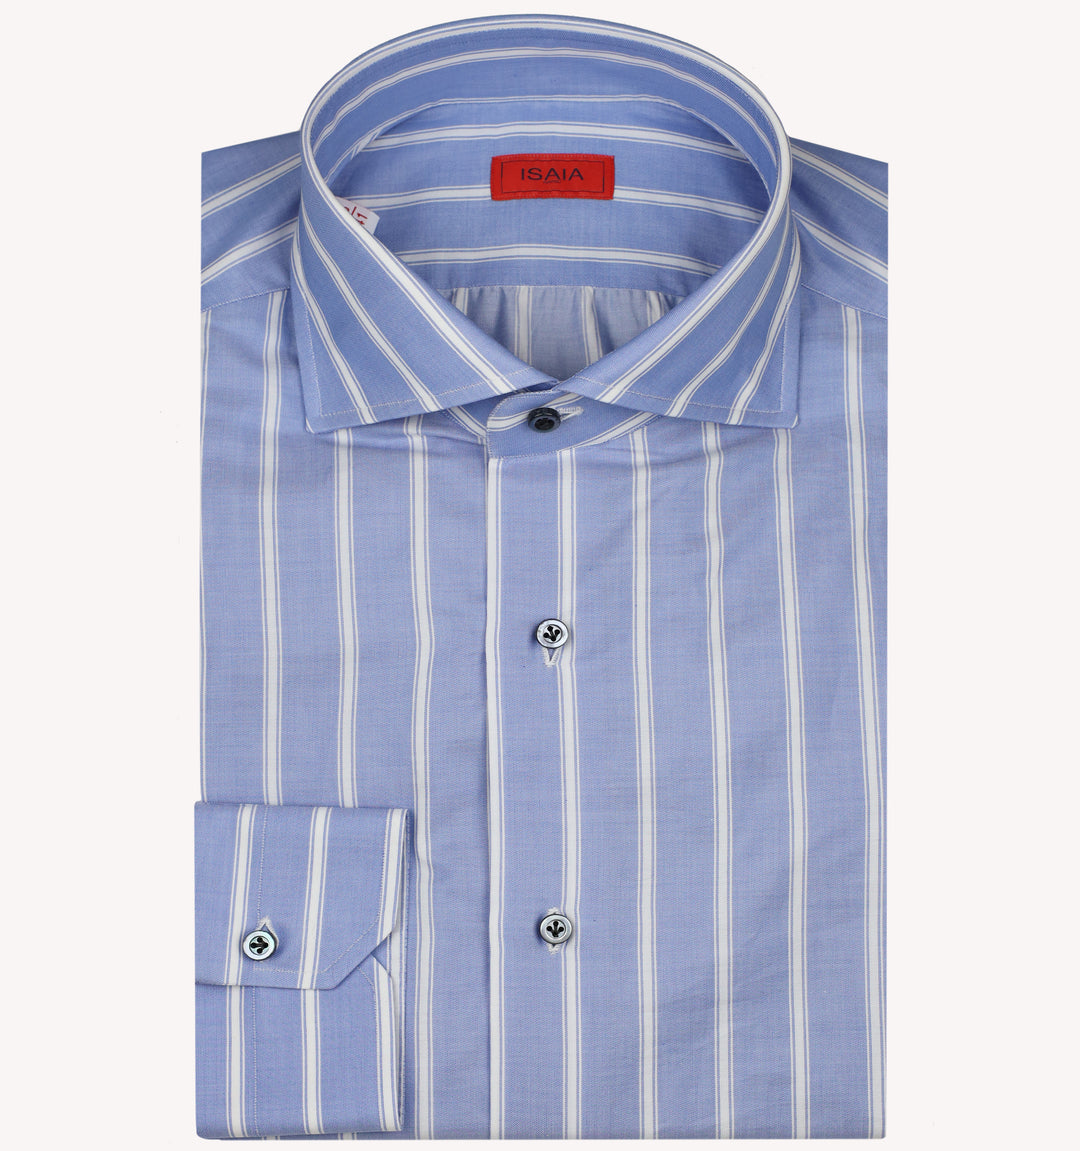 Isaia Stripe Dress Shirt in French Blue